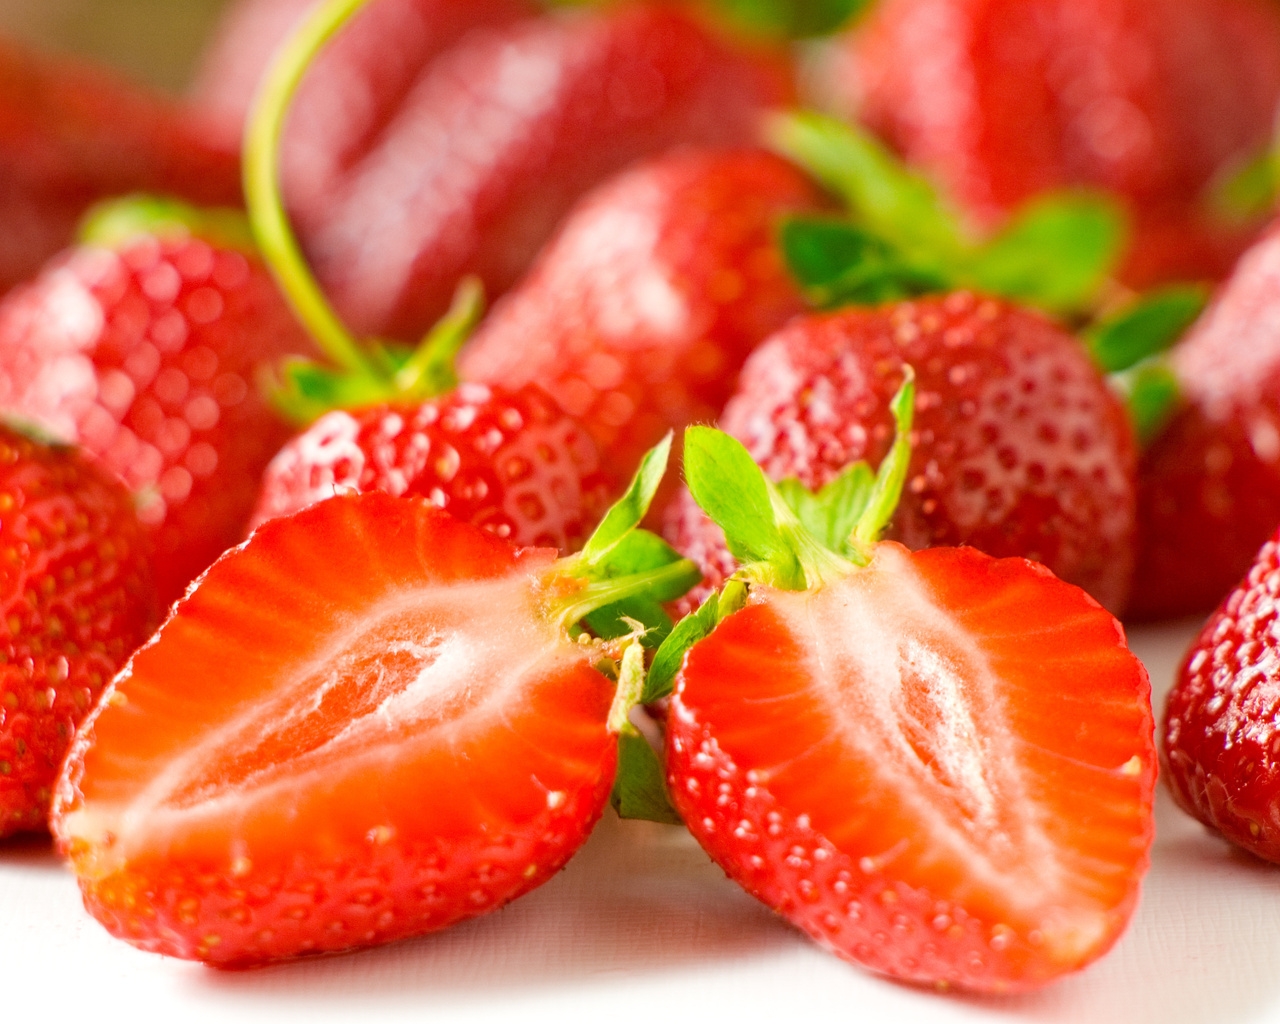 Strawberry Fruits for 1280 x 1024 resolution